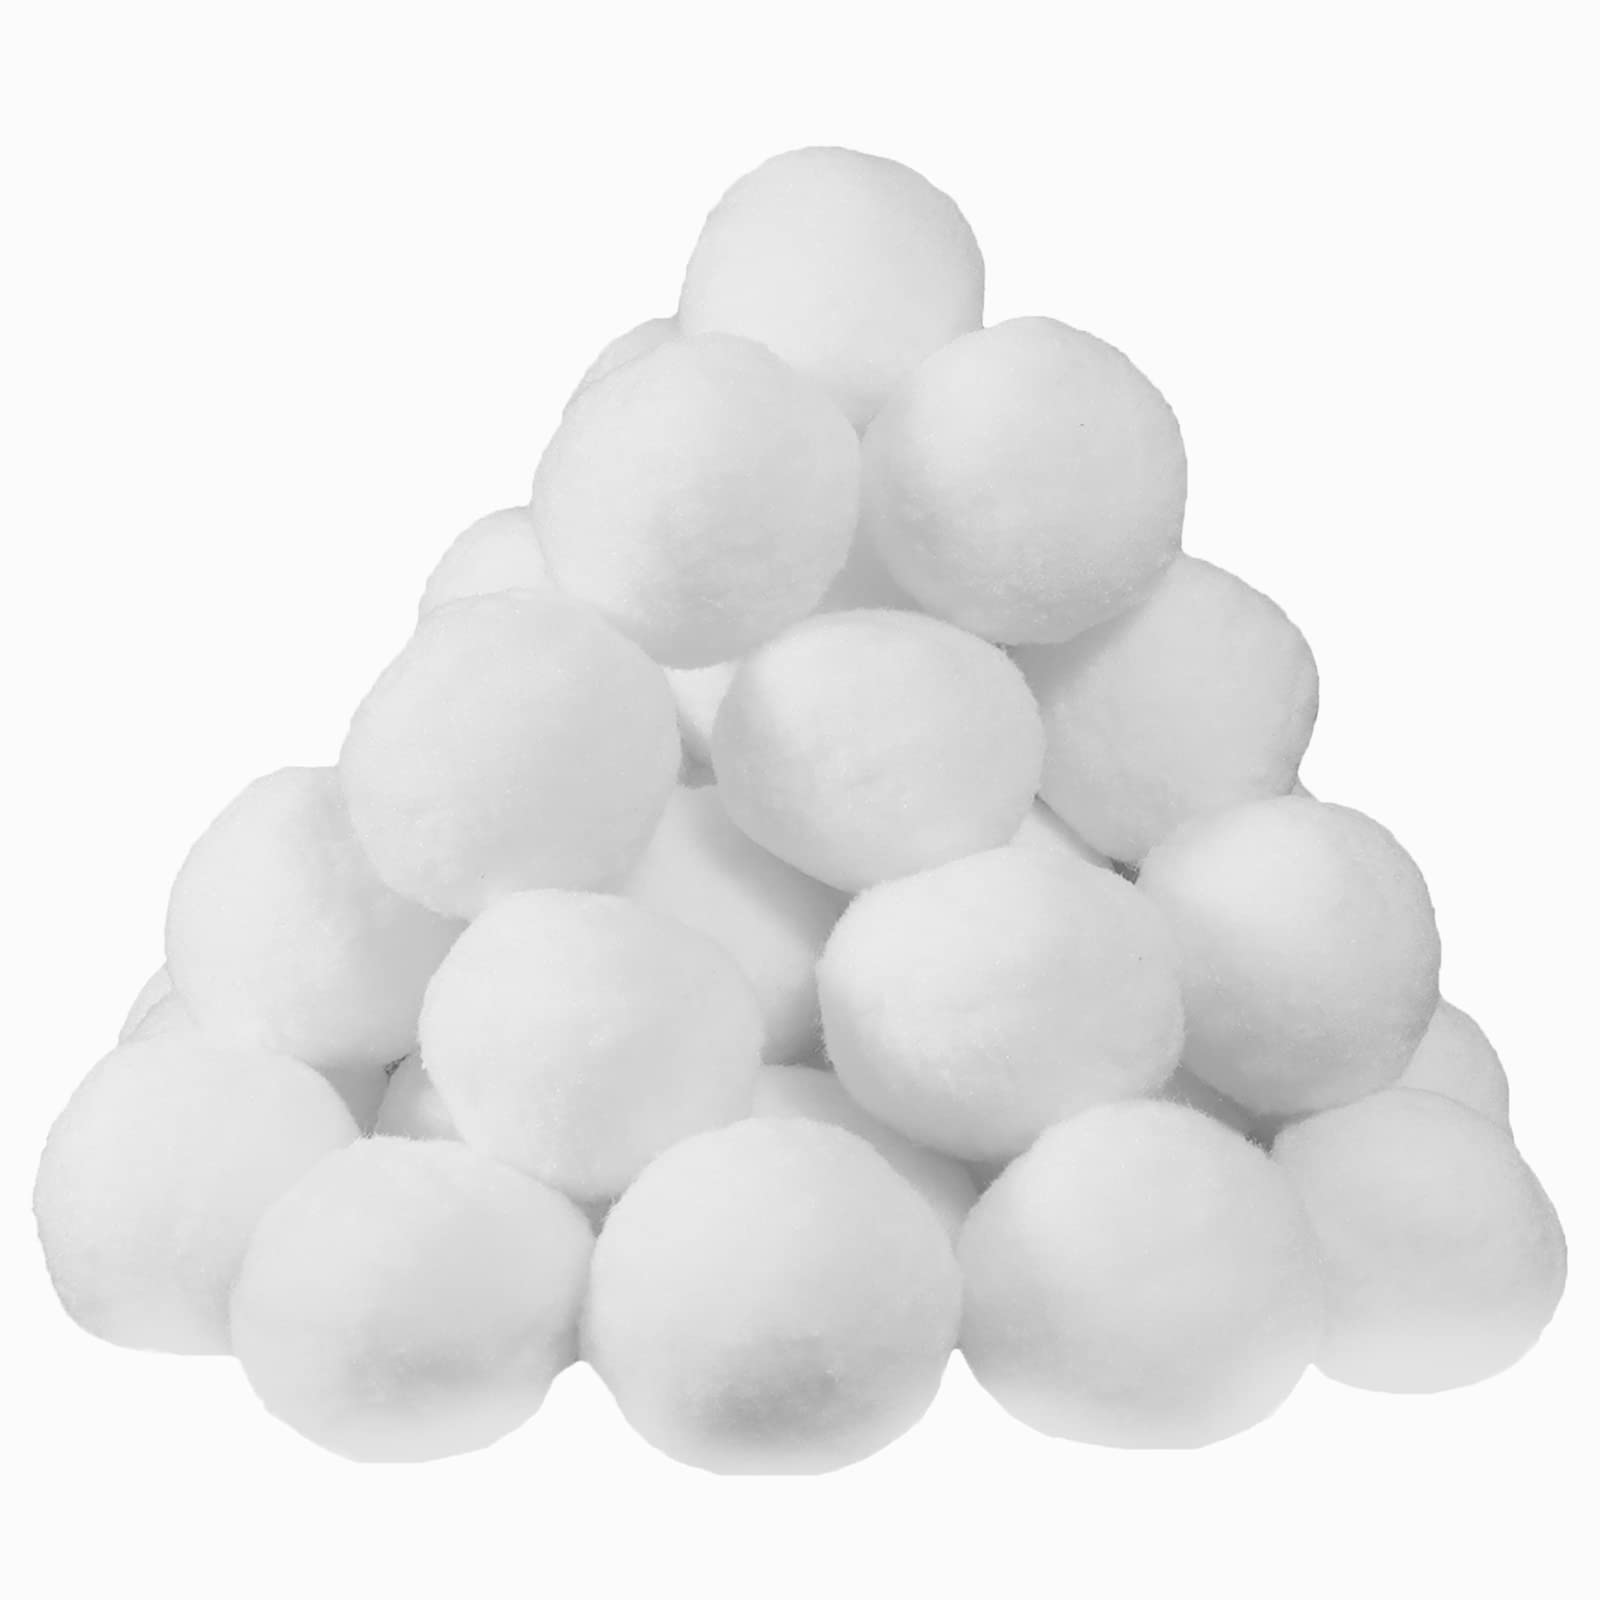 50 Pack Kids Snowball Indoor Snowball Fight,Fake Snowballs Winter Xmas Decoration,2.7 Inch Realistic White Plush Snow Balls for Kids Adults Indoor Outdoor Game